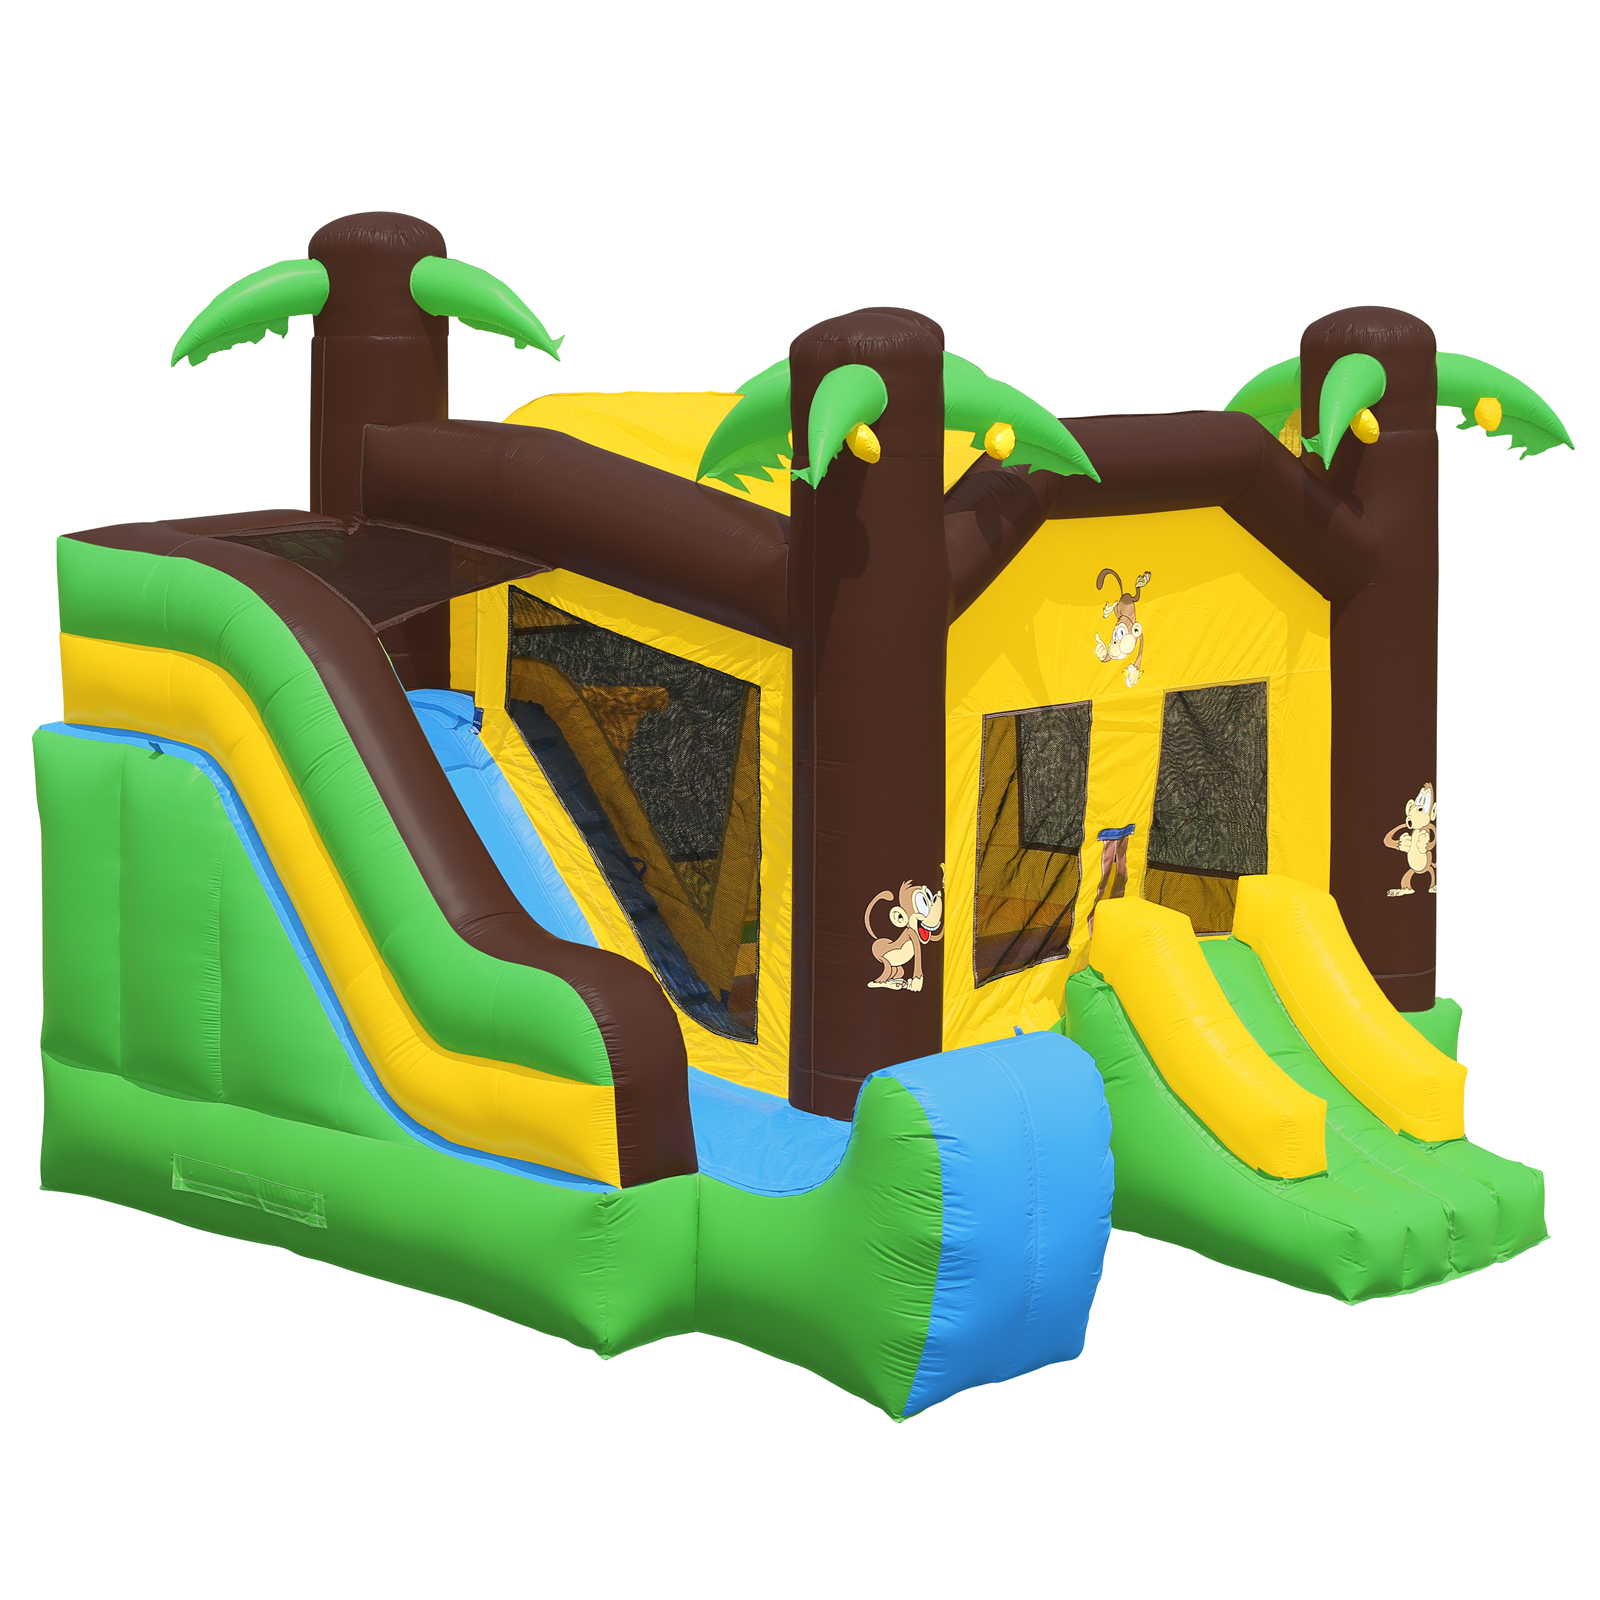 Cloud 9 Commercial Grade Bounce House 100% PVC Jungle Slide Inflatable Only - image 1 of 7